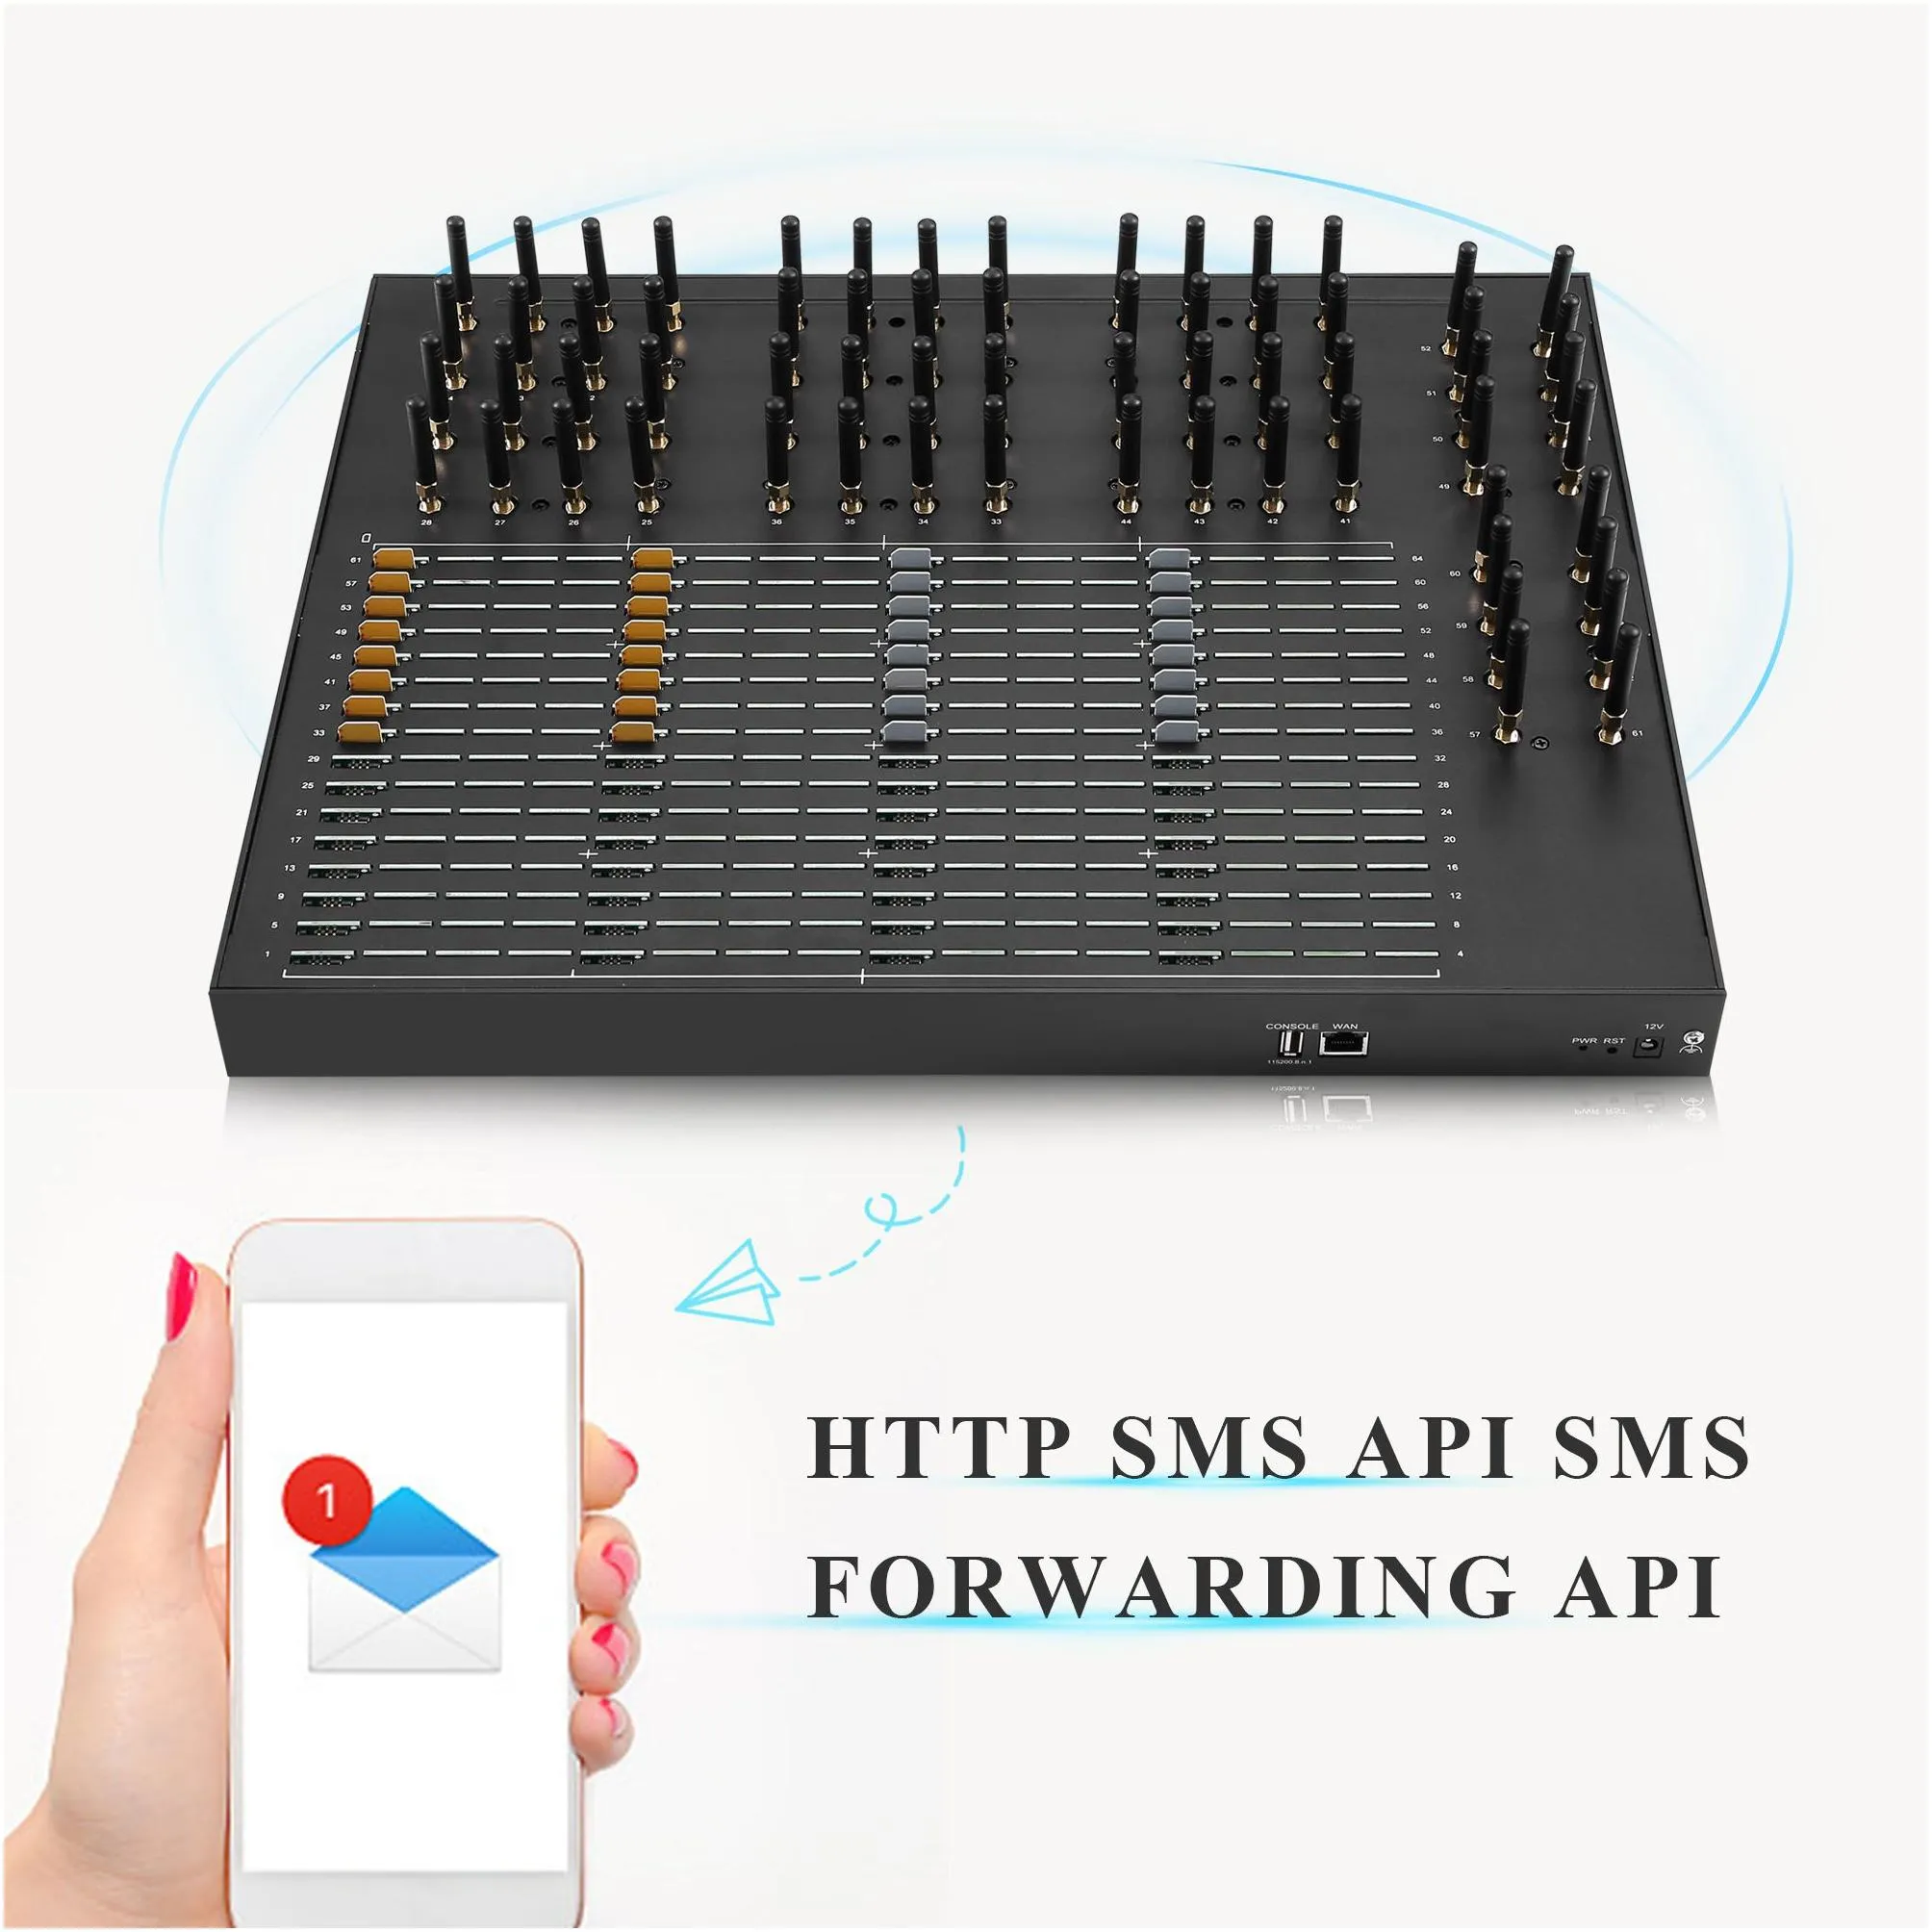 2G gsm 64 Antenna Channel 64 sims High Gain Signal Wireless Modem Support SMPP Http API Data Analysis And SMS Notification System/256sims and 512 sims